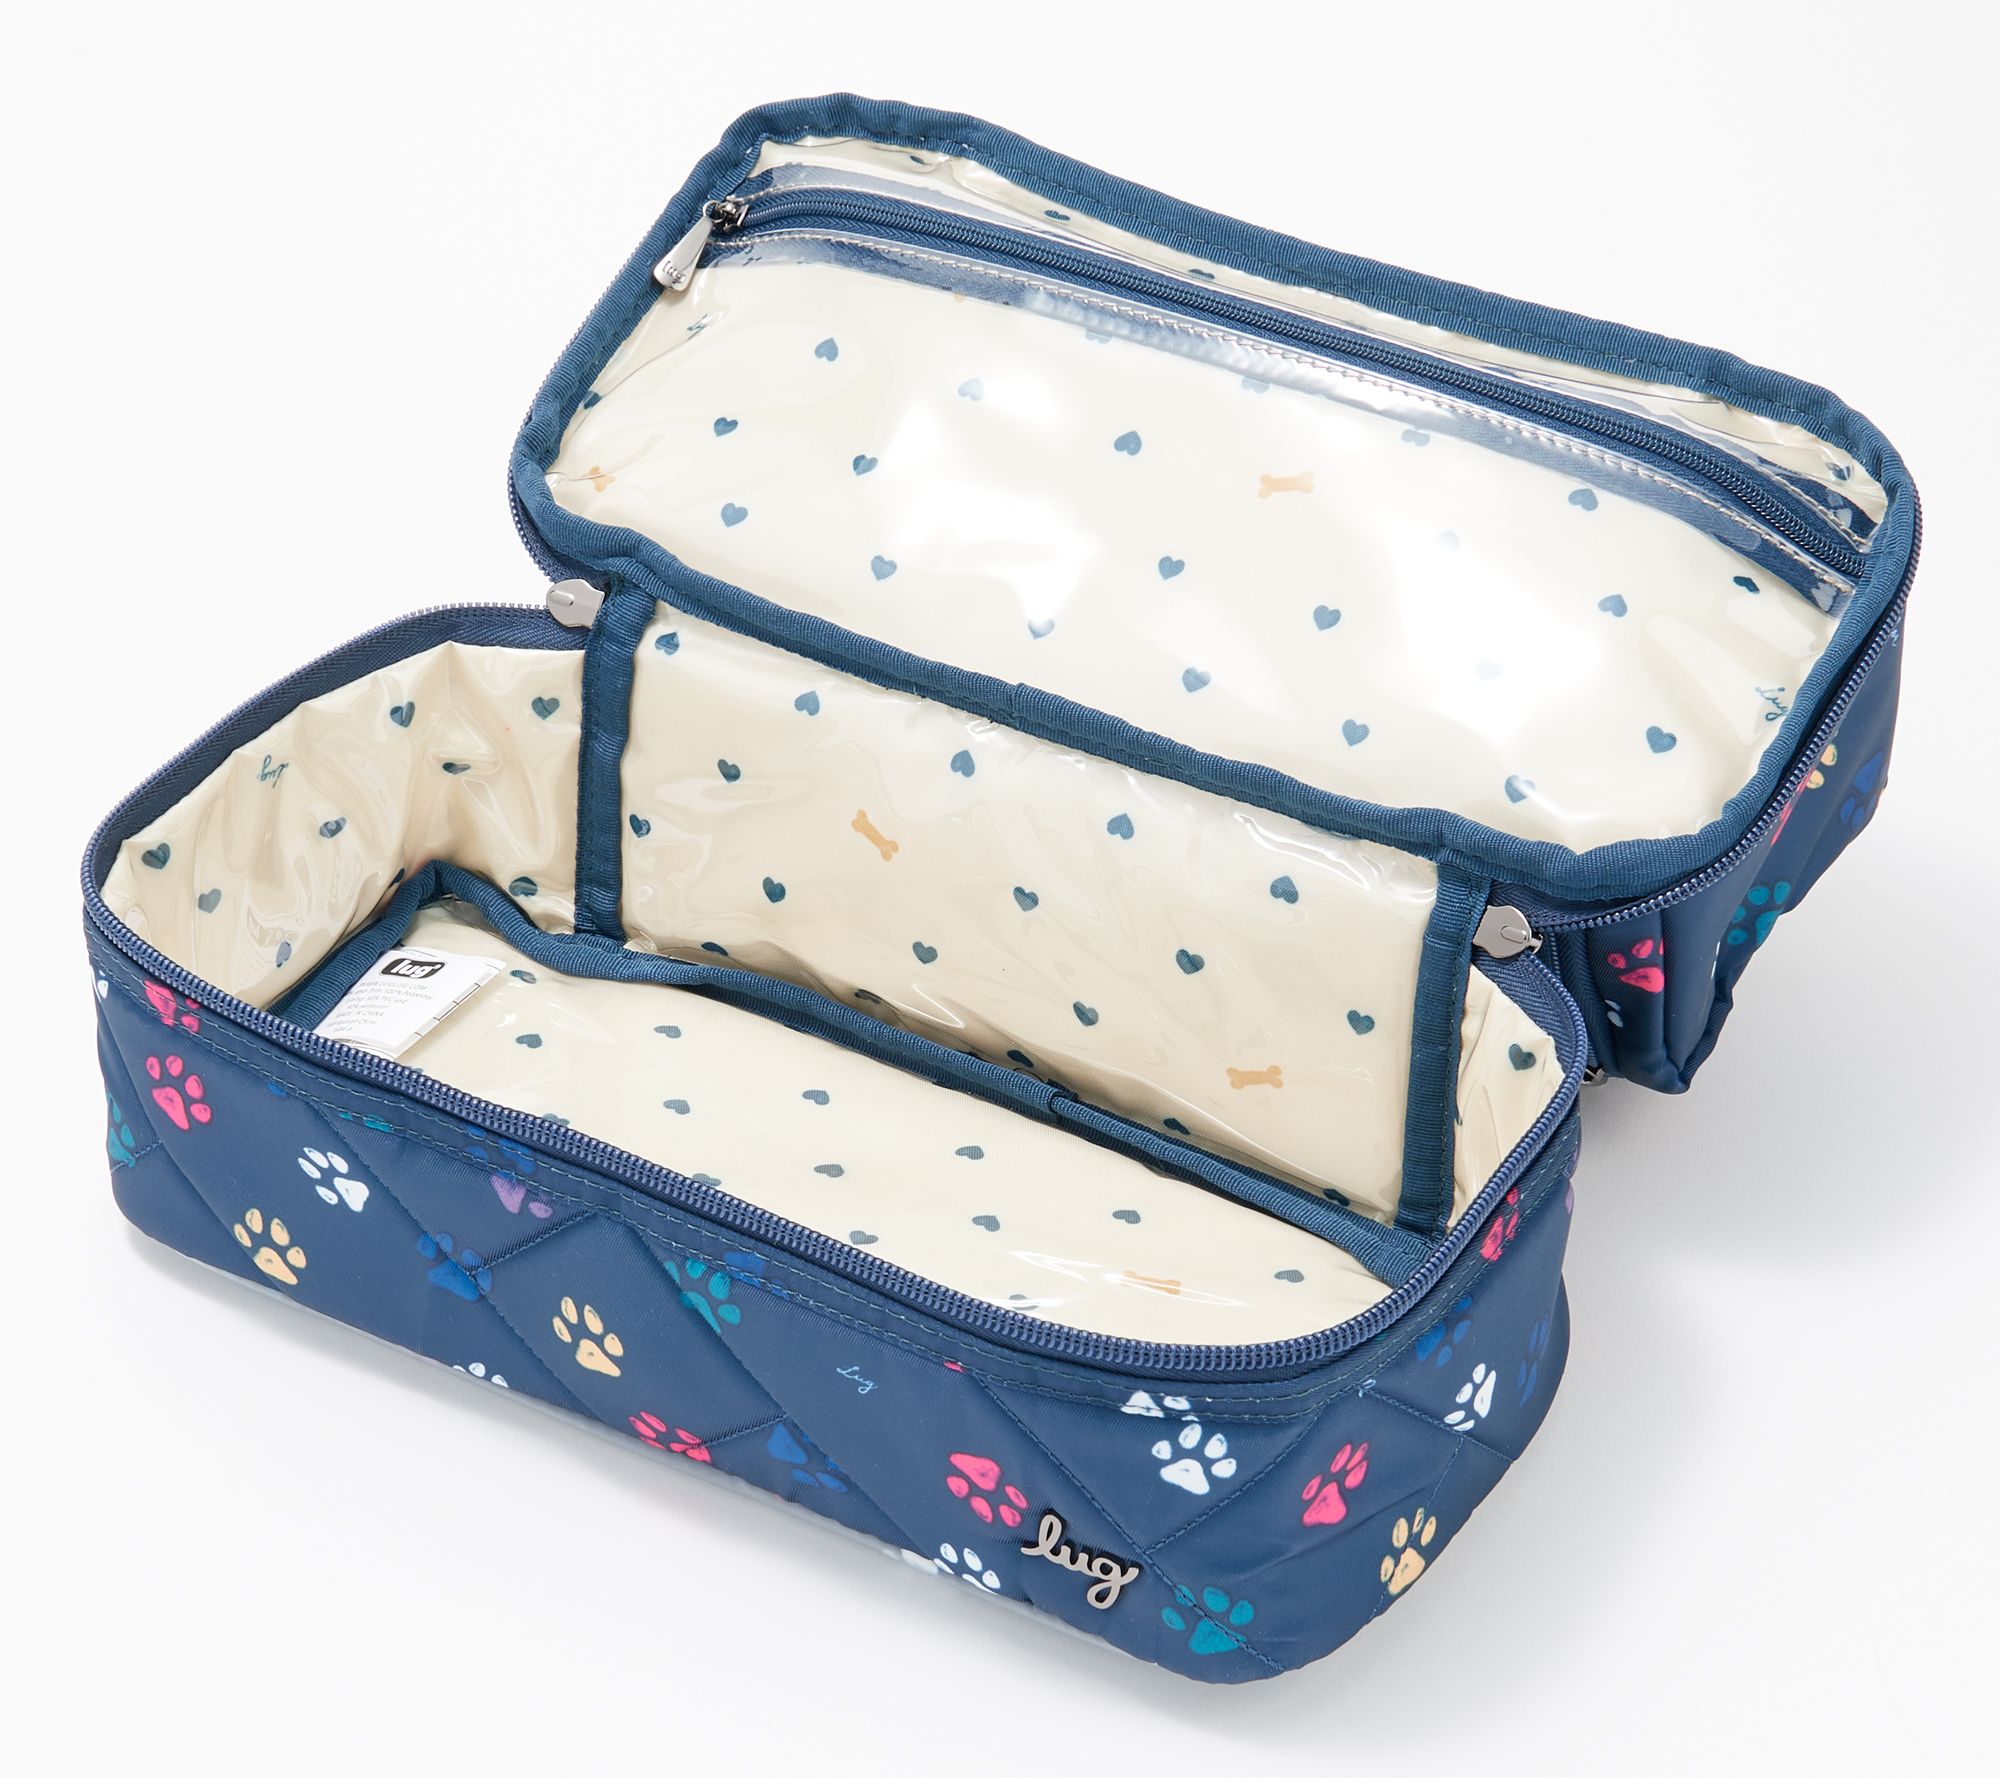 Lug Hanging Toiletry Case - Caddy 